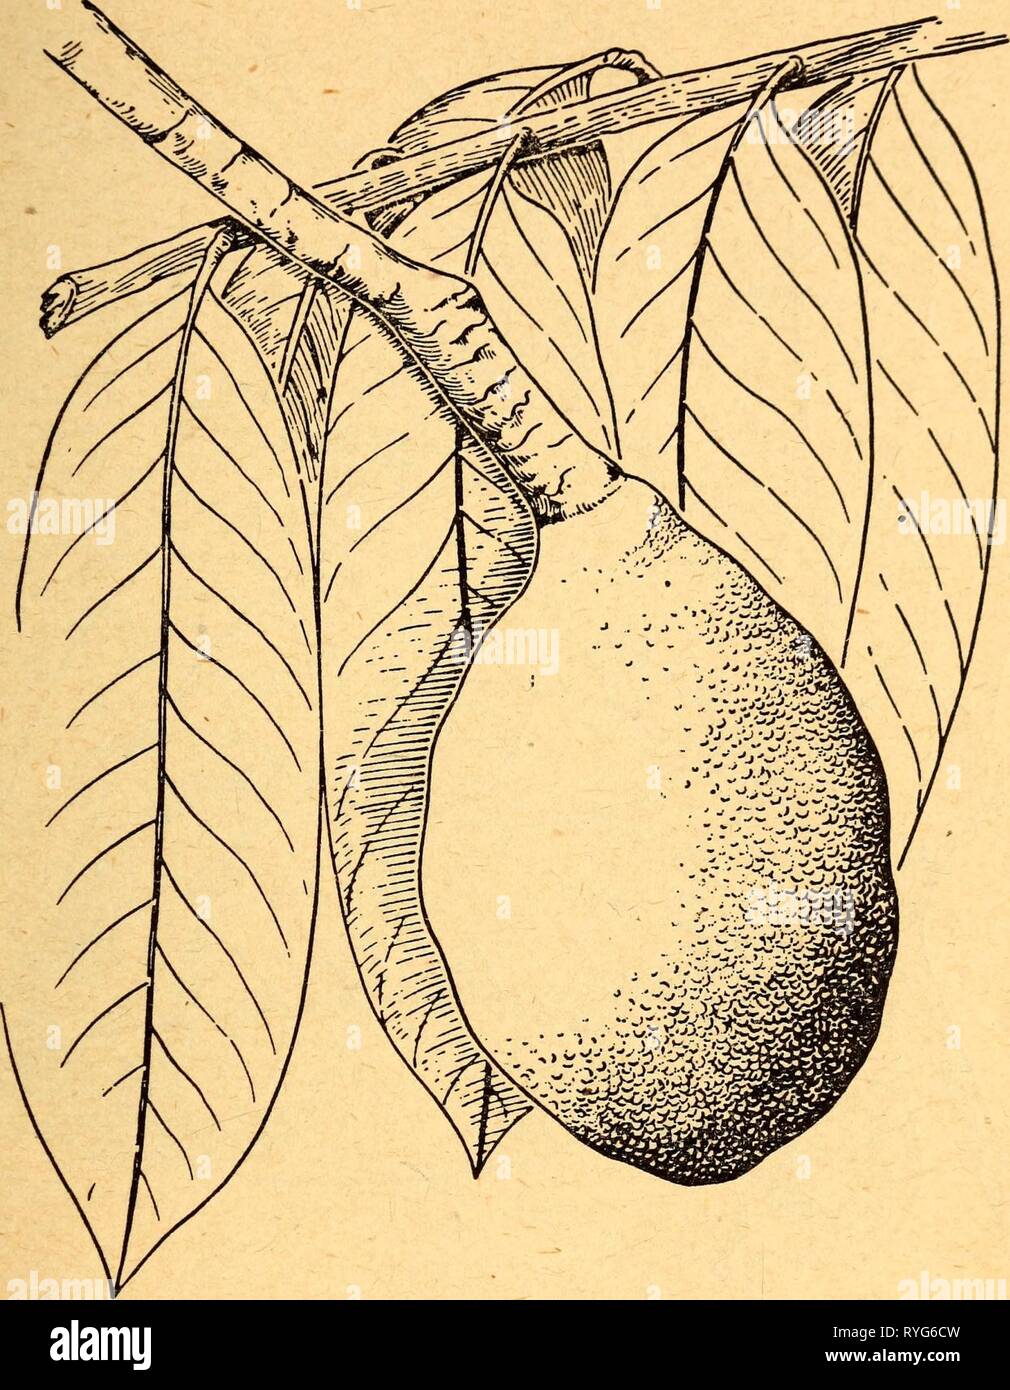 Edible and poisonous plants of the Caribbean region  ediblepoisonousp00dahl Year: 1944  39    30. SUNZAPOTE Licania platypus This fruit is poor in flavor and seldom eaten except when no other fruit is available. The tall, handsome tree grows in profusion in the lowlands of Central America. The elongated young leaves are red or purple, the fruit is very large, with a rough, brownish rind, and the stringy flesh is deep yellow, juicy and sweet. Other names for the sunzapote are sunza, SunganOy and sangre (Costa Rica). Stock Photo